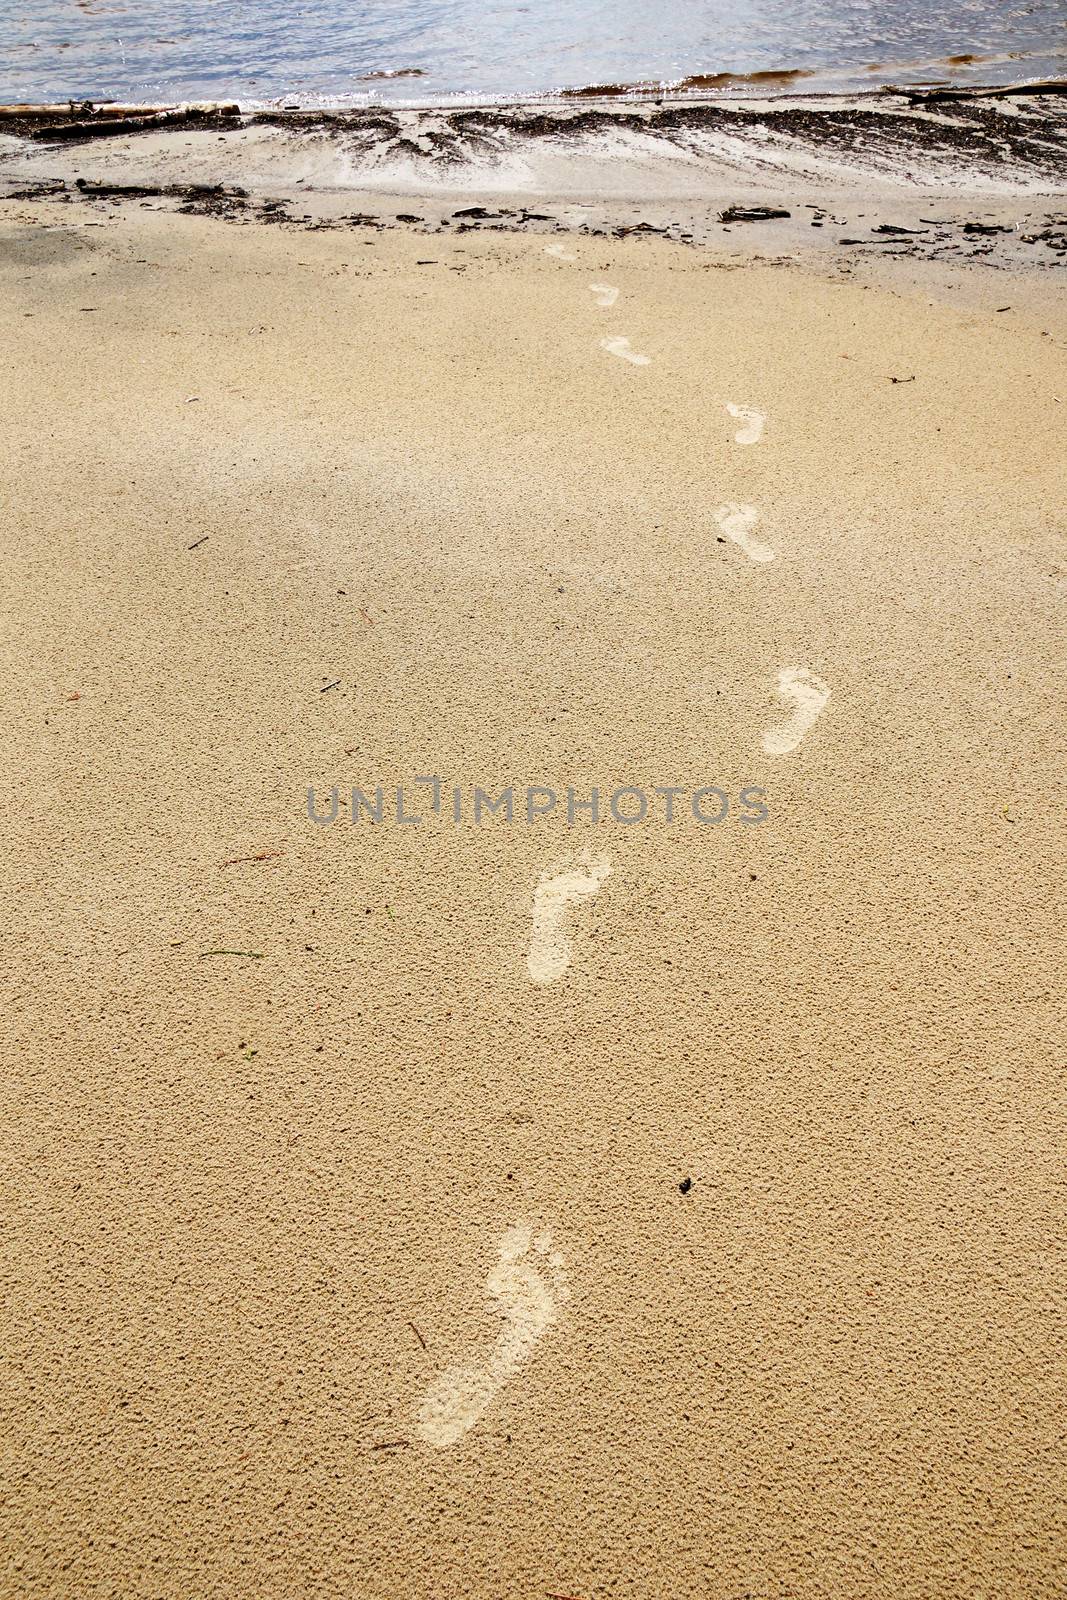 Footprints on the beach by Mirage3